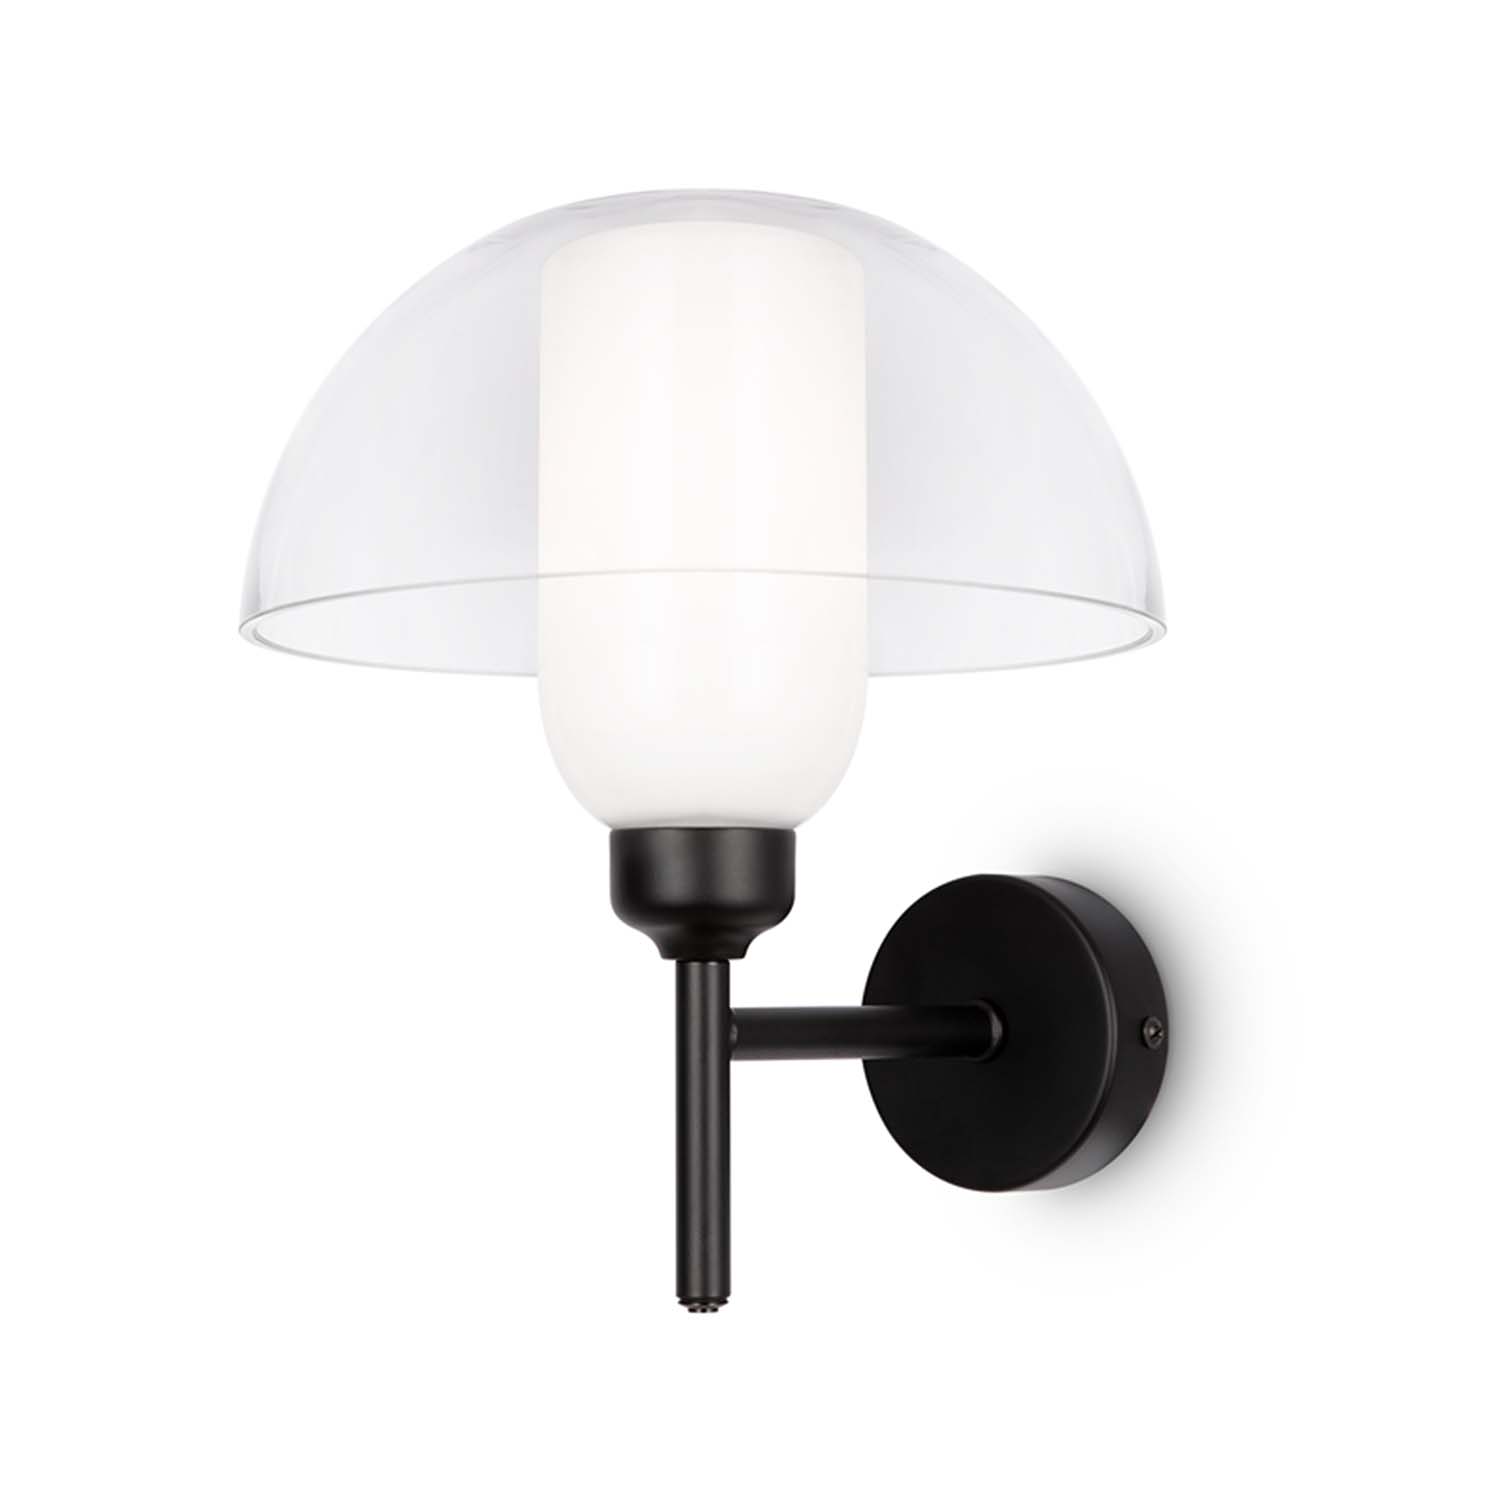 MEMORY - Chic black wall light and white glass dome